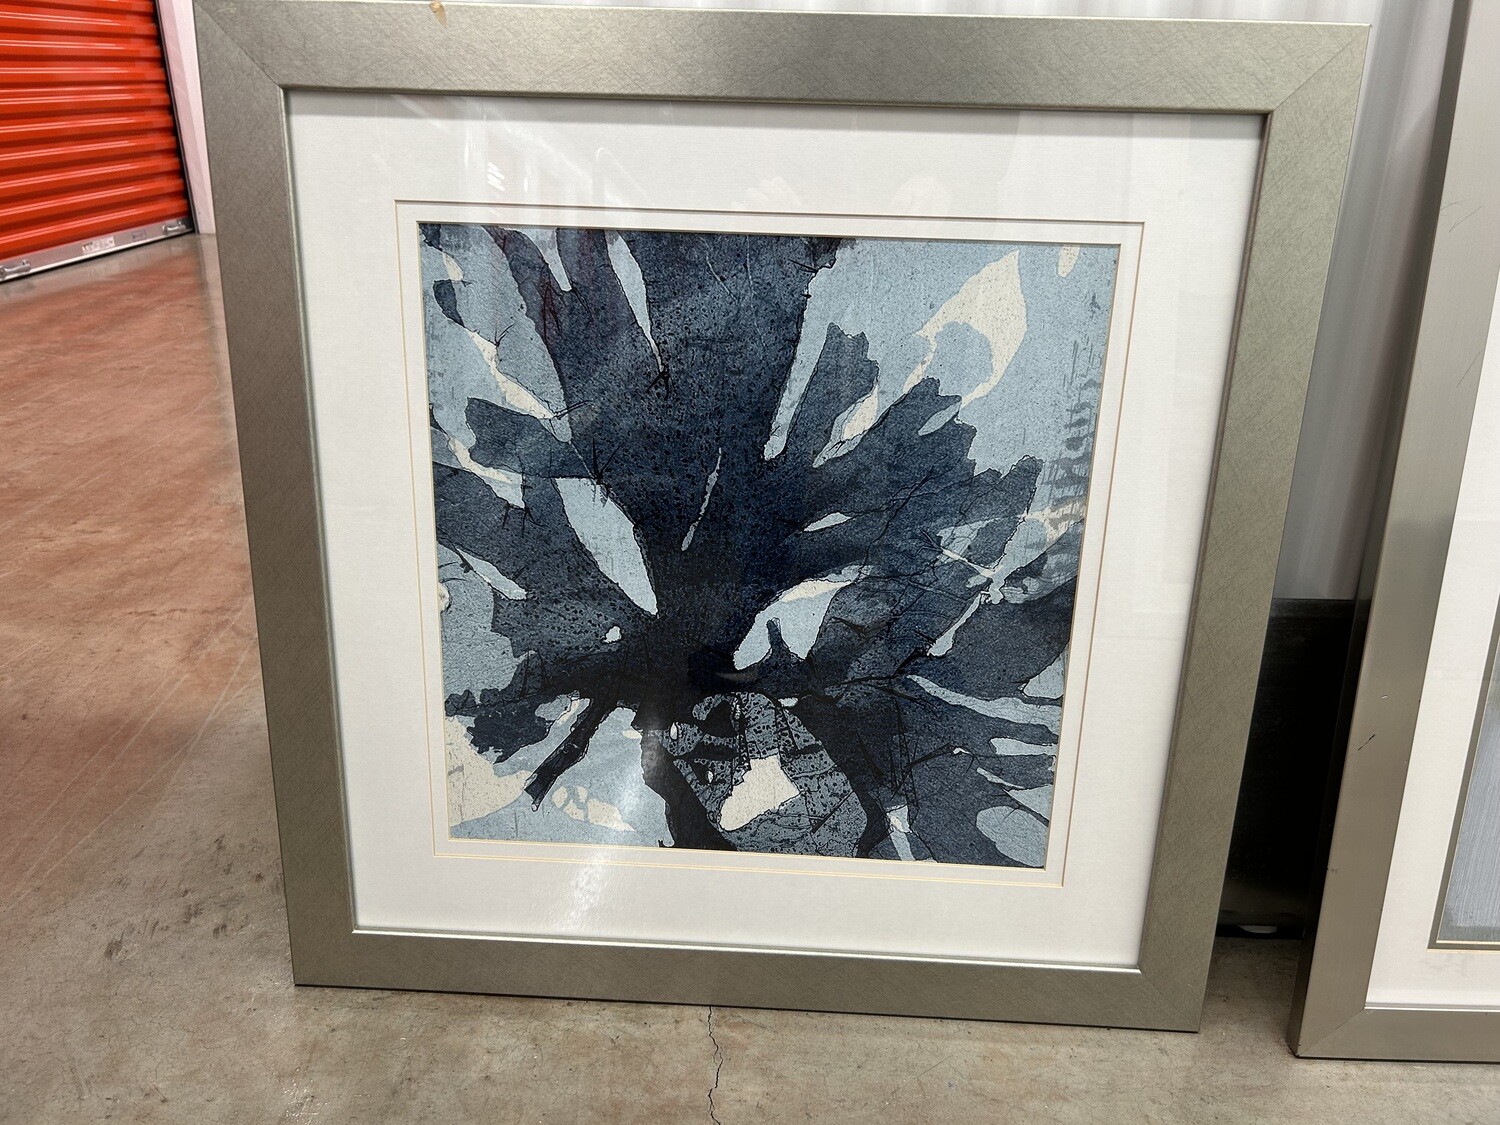 Framed Art: Blue Leaves #2214 ** 9 mos. to sell, clearance + 30% off